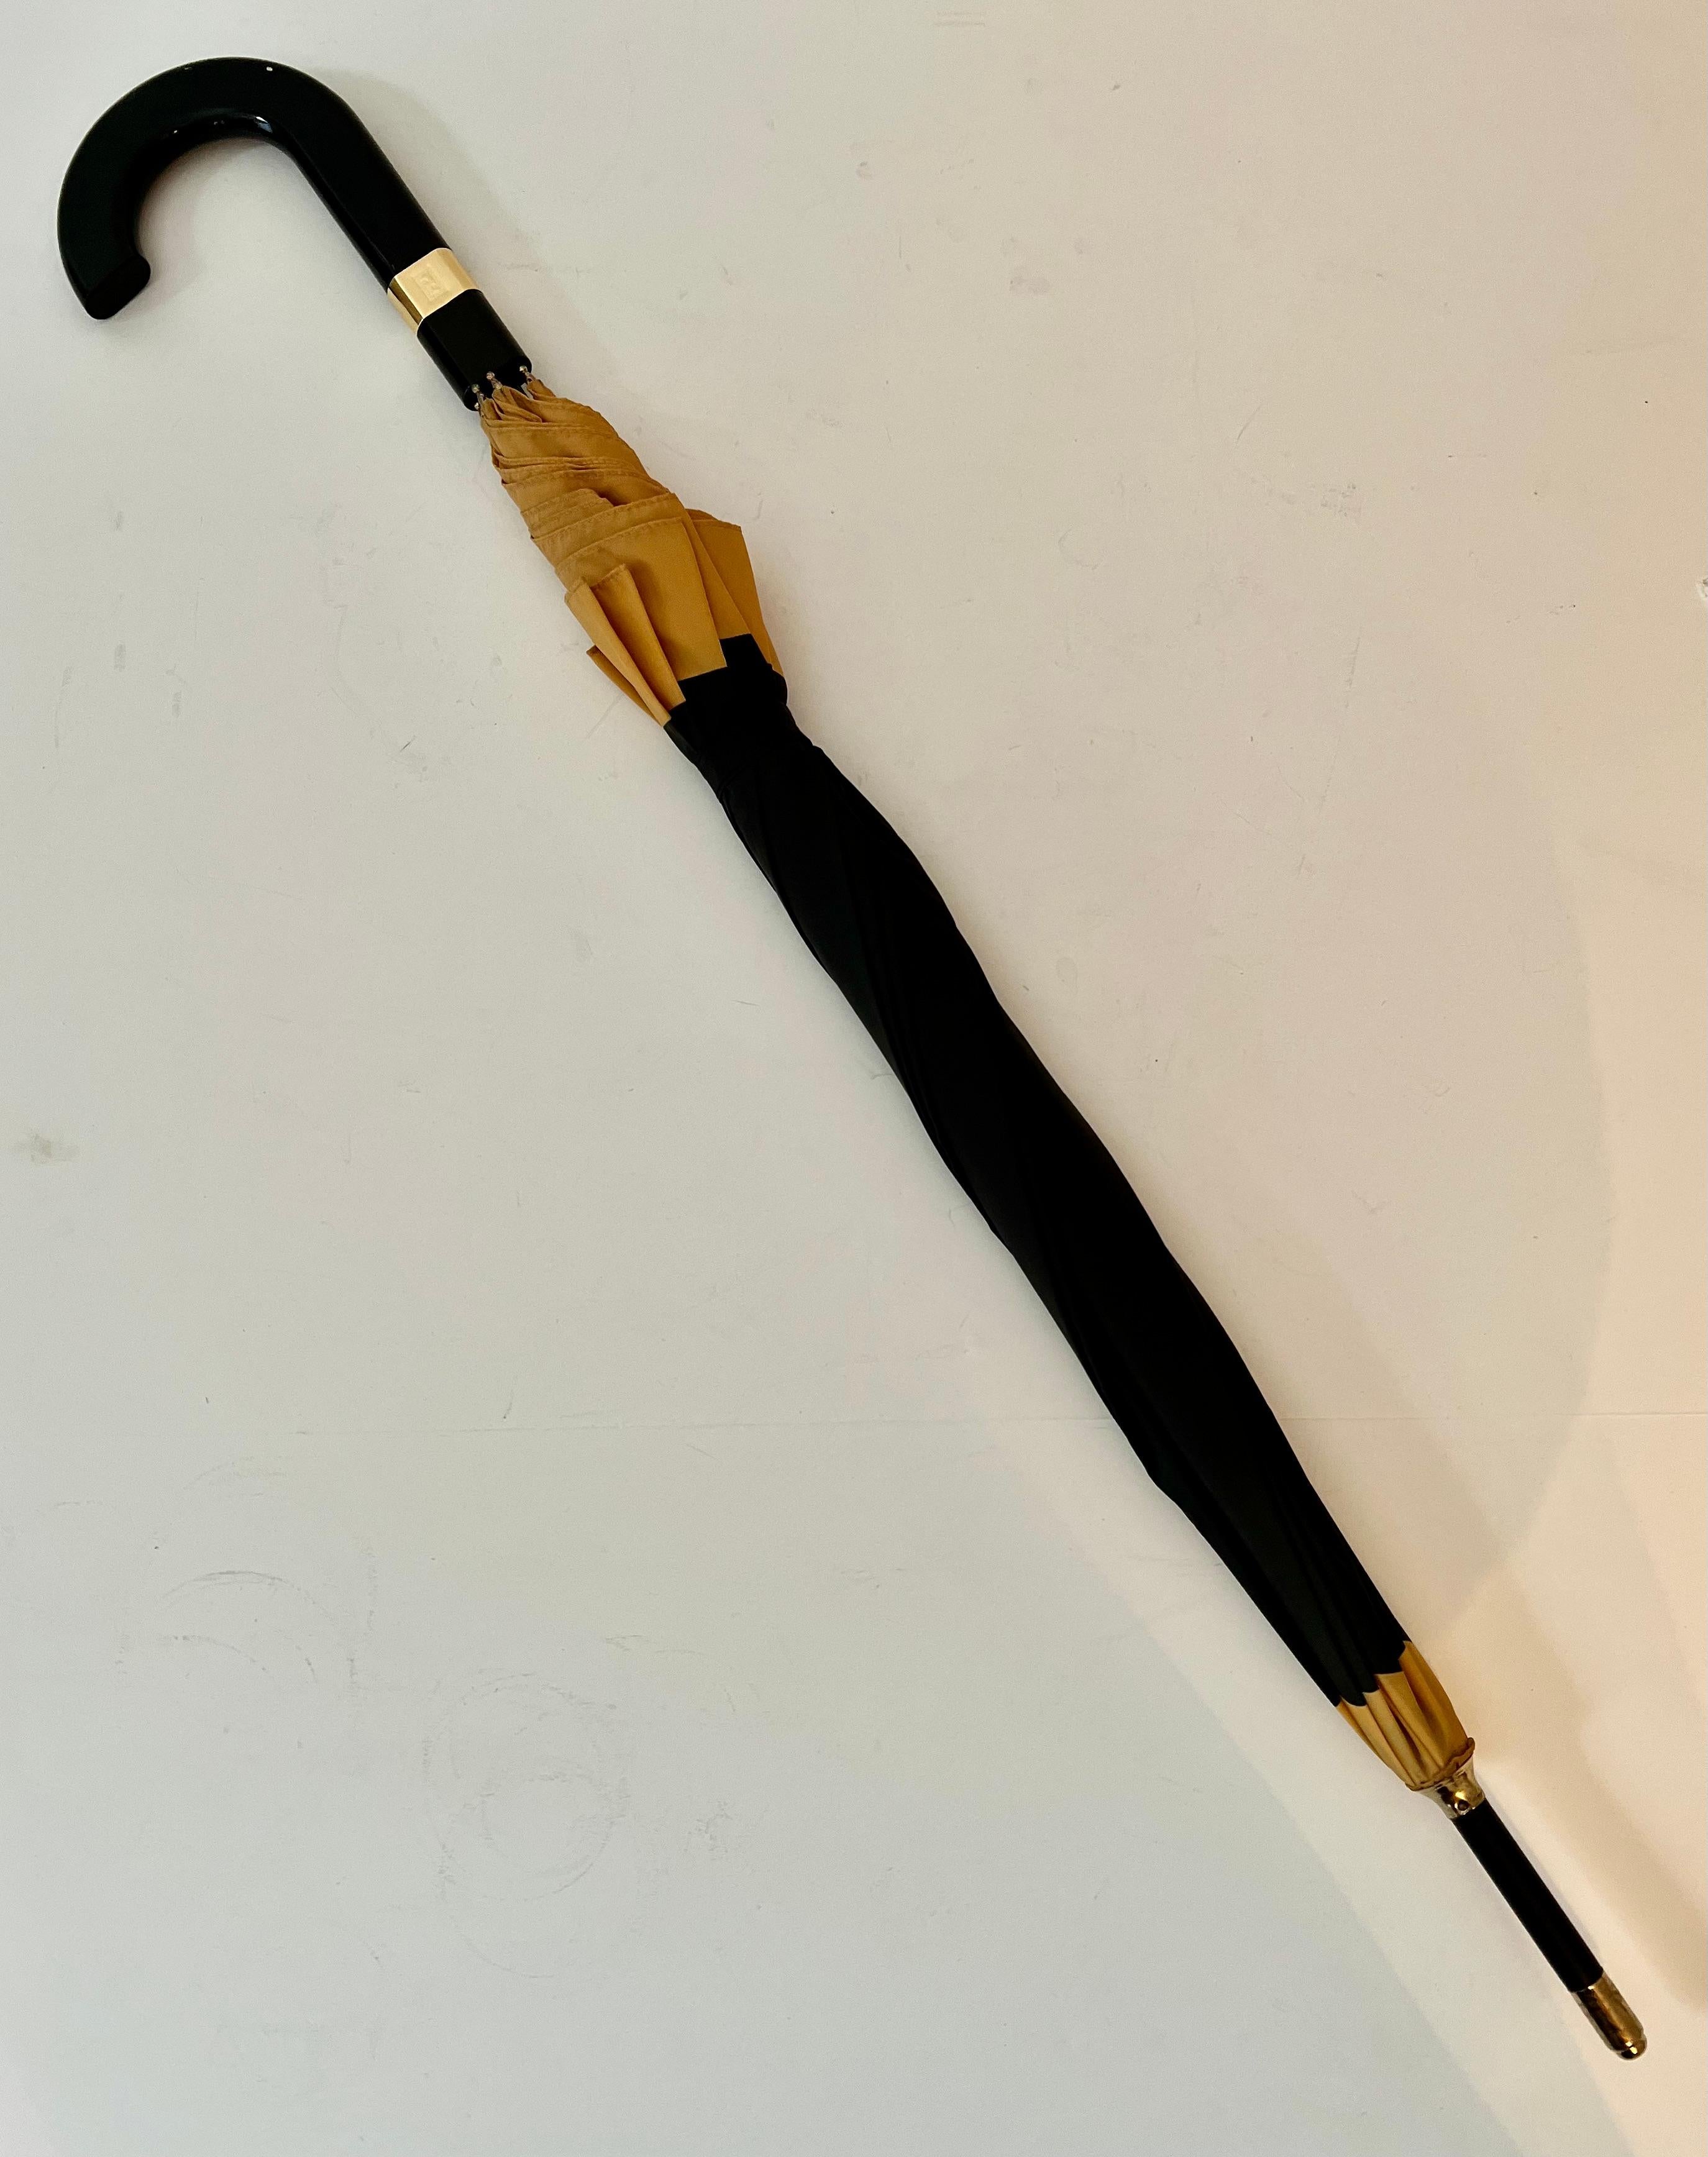 A wonderful black and gold umbrella by Fendi - signed Fendi Perfumes. In wonderful condition, design works well unisex - full sized with case - sleek handle flattened and with brass band 